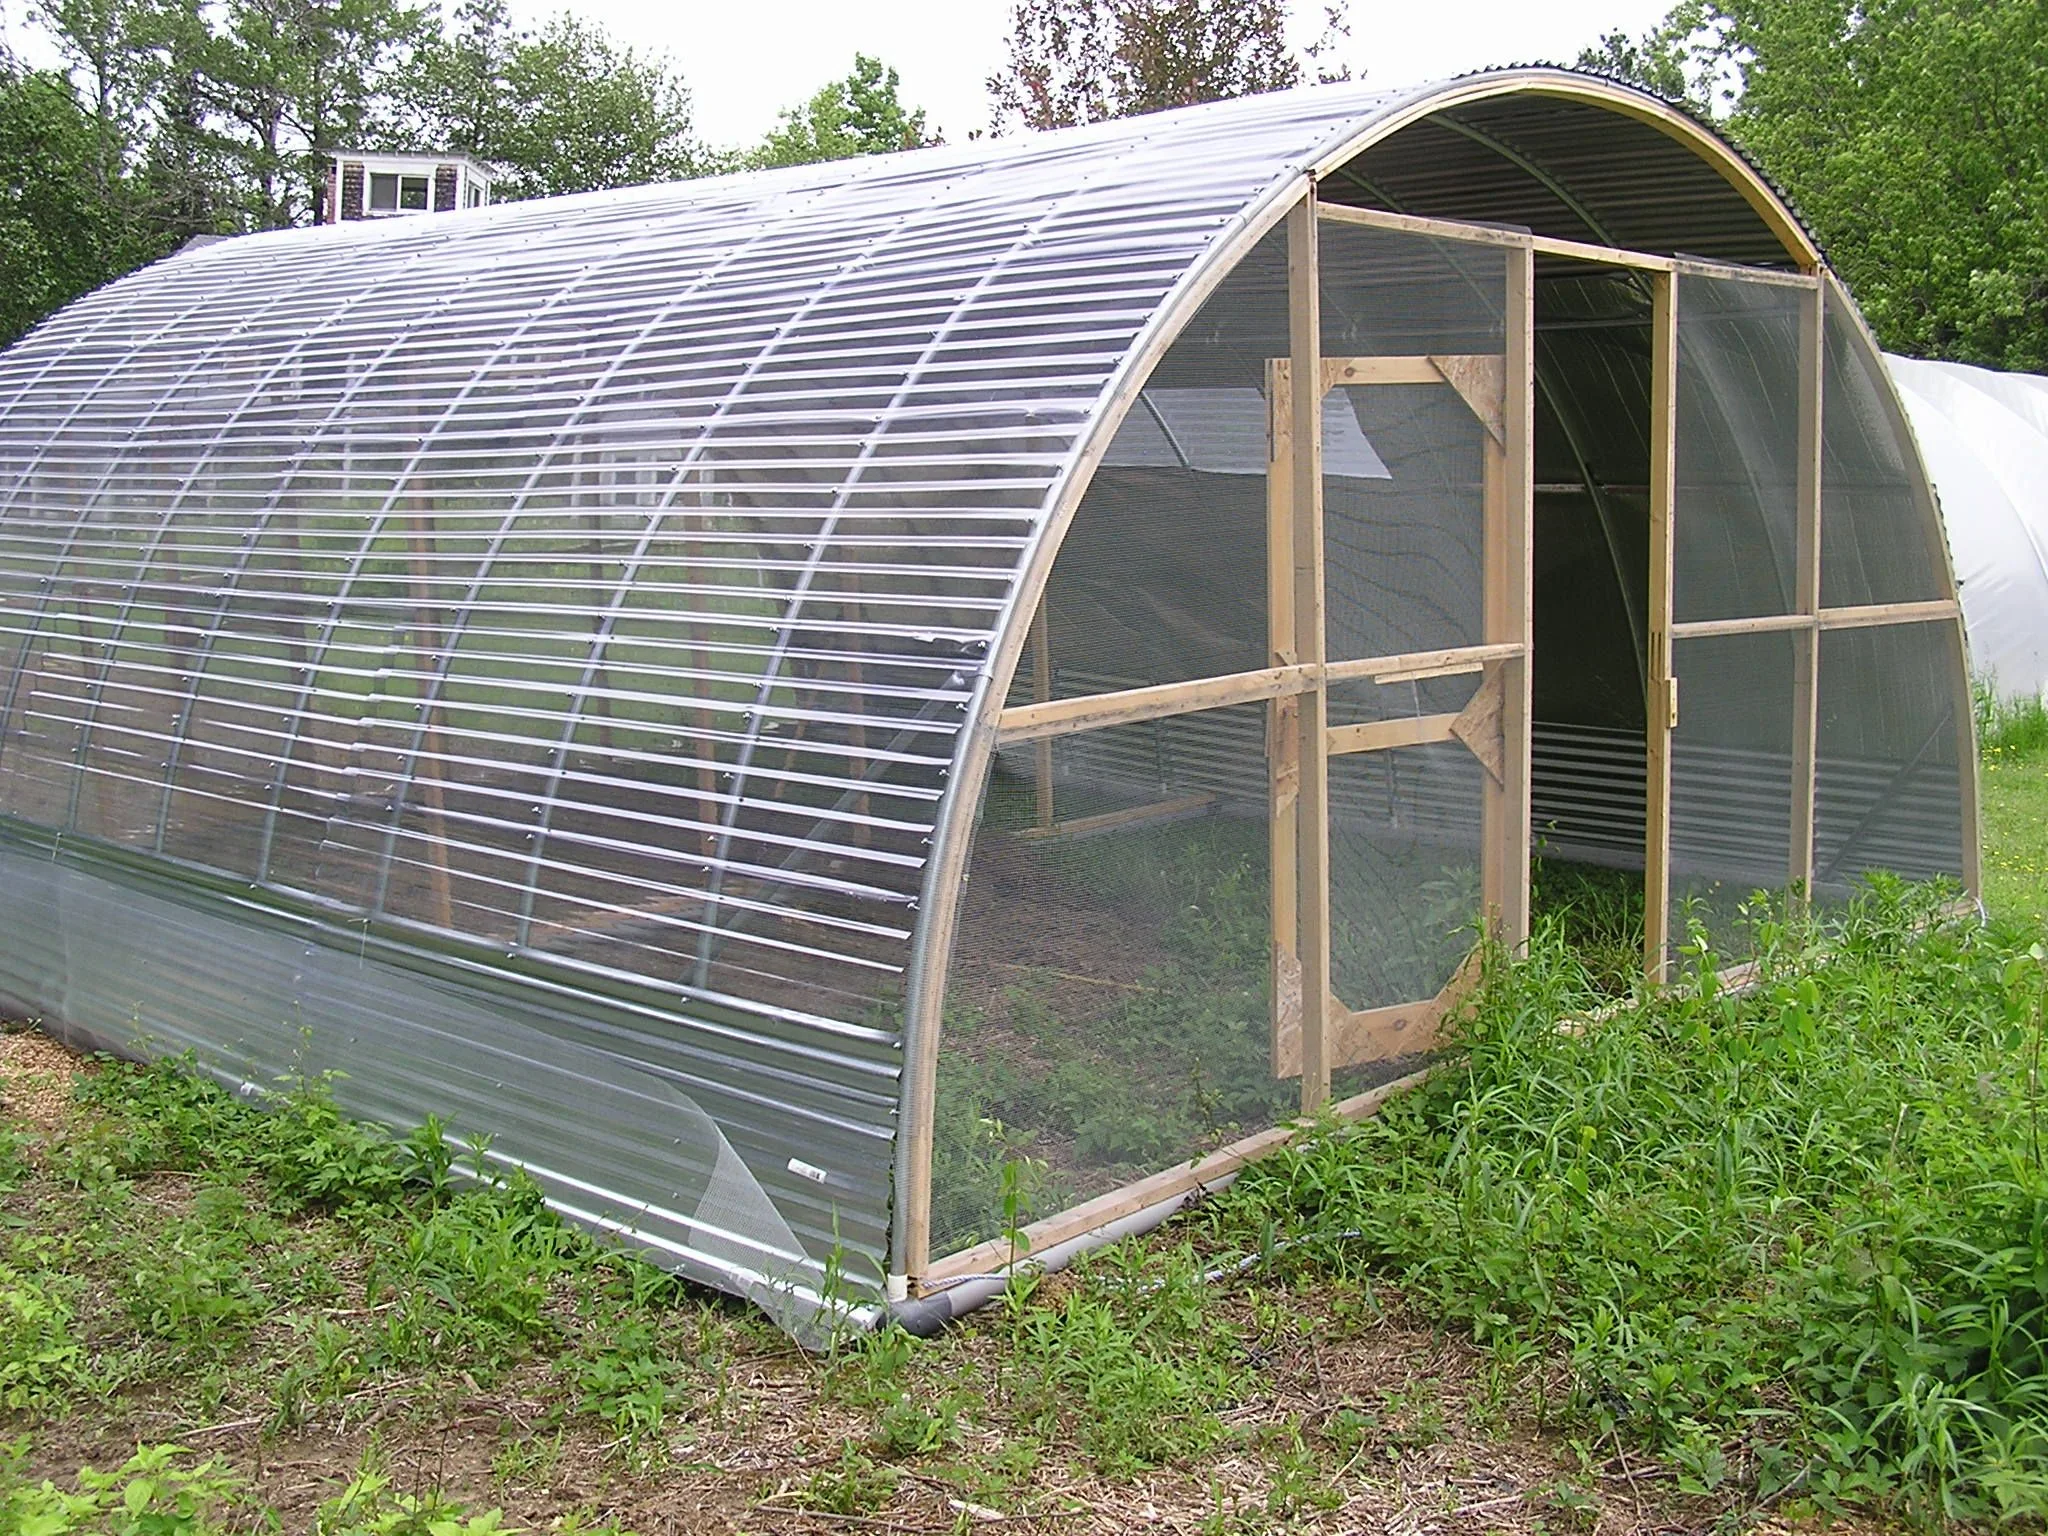 Our Hoop House\/chicken tractor | Chickens backyard, Hoop house chickens, Building a chicken coop